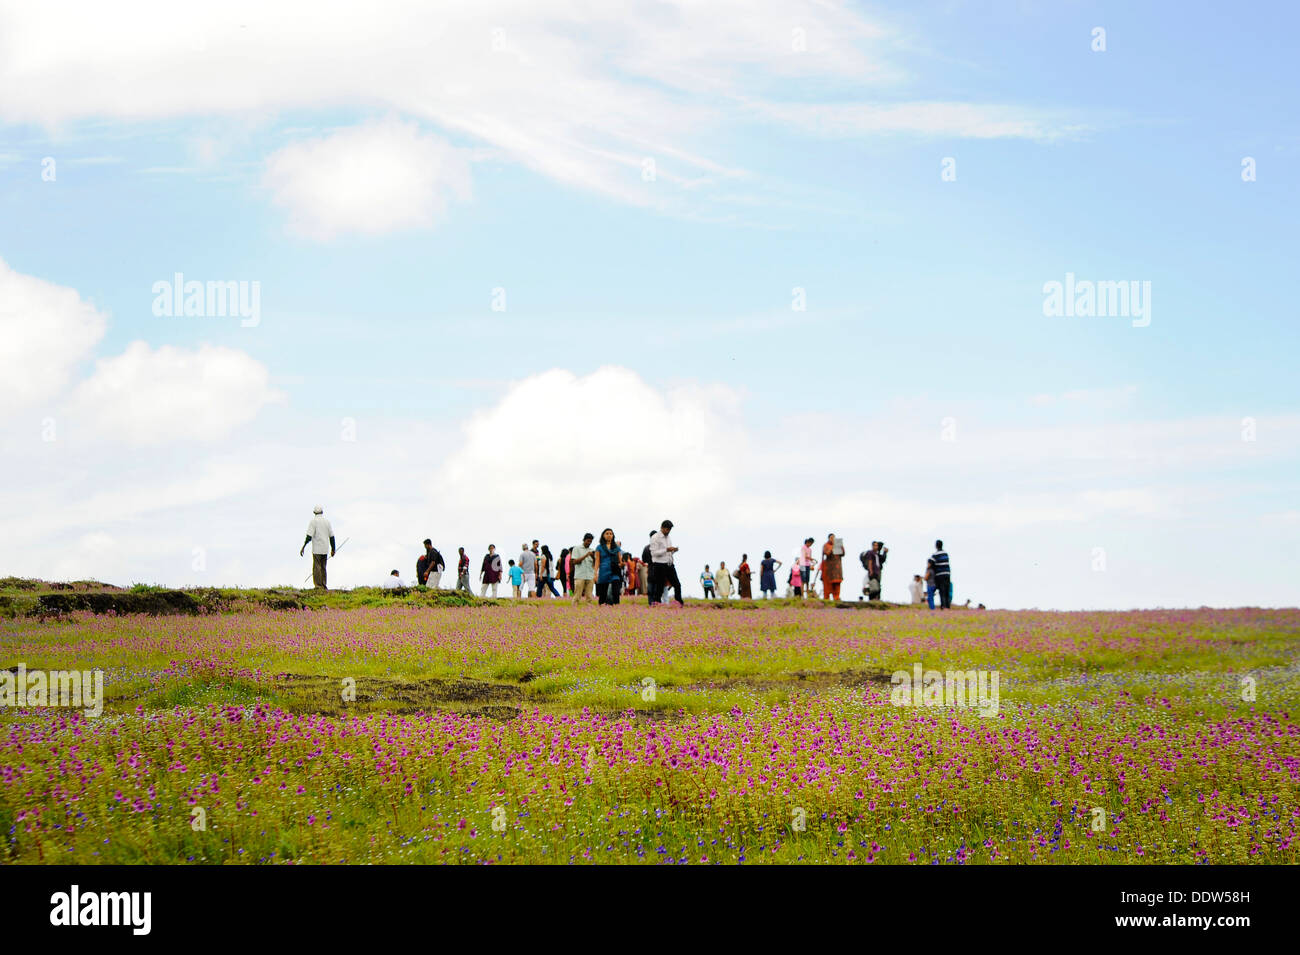 Couple sitting on Bed of flowers, Kass Plateau, UNESCO approved World Heritage Site Stock Photo